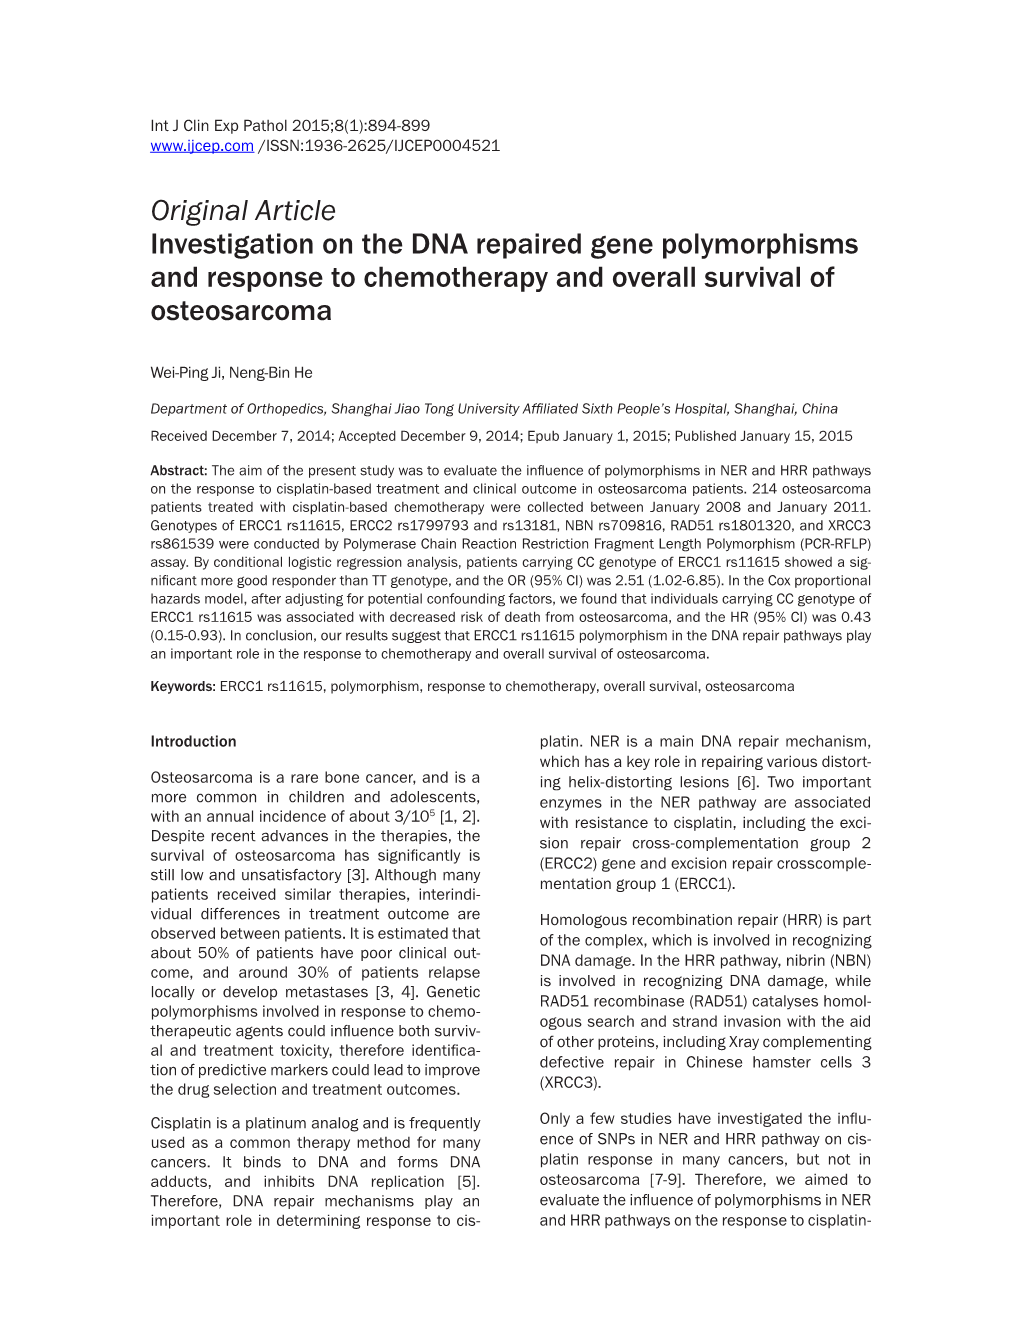 Original Article Investigation on the DNA Repaired Gene Polymorphisms and Response to Chemotherapy and Overall Survival of Osteosarcoma